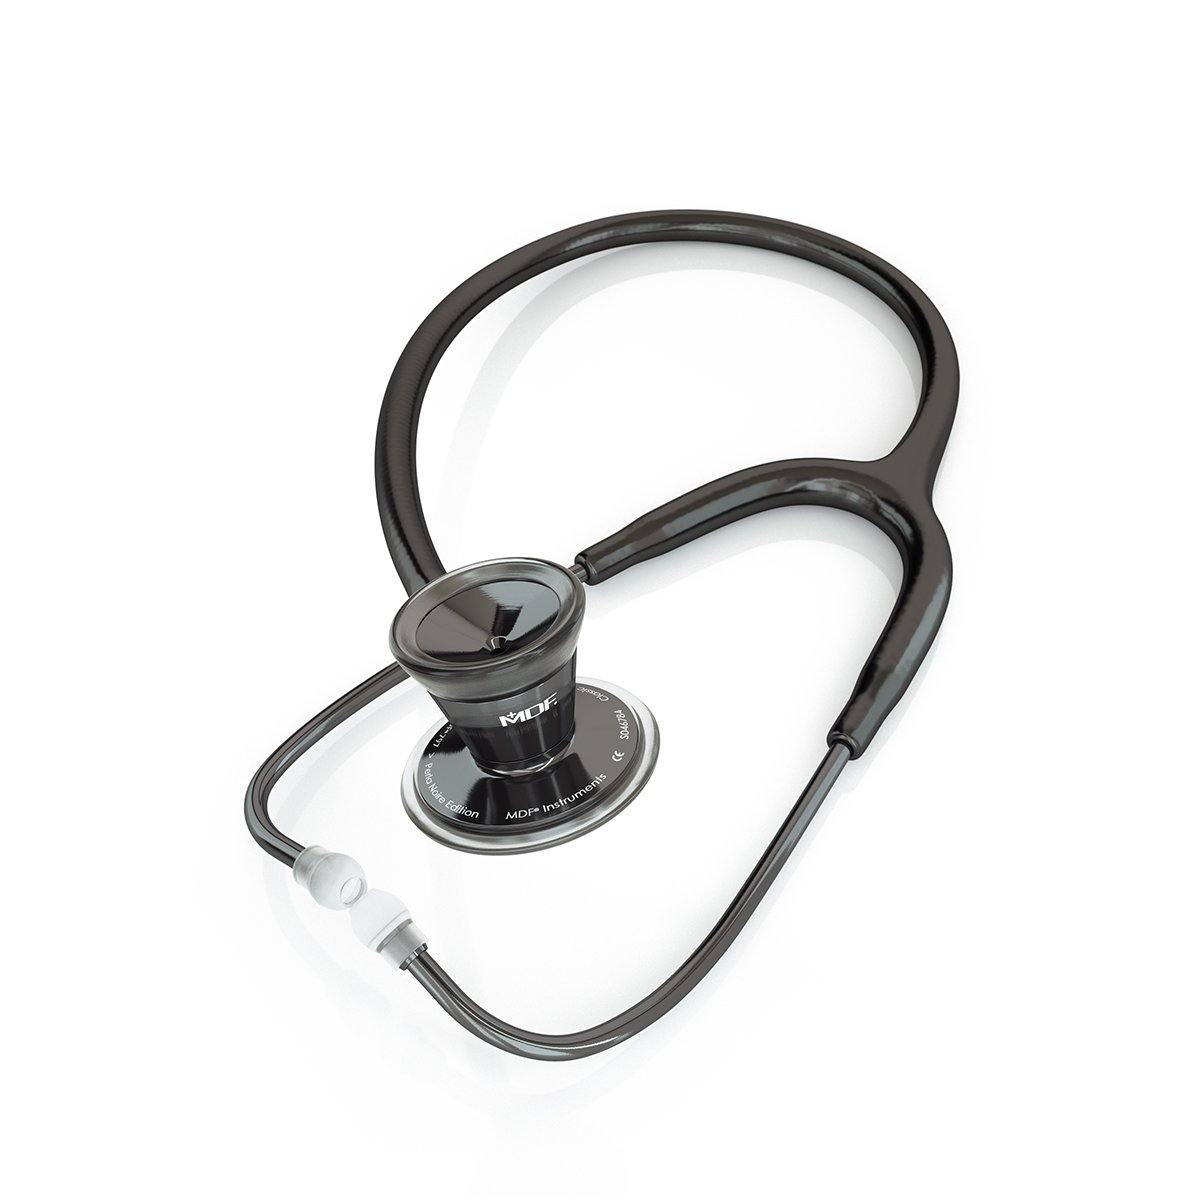 Top 5 MDF® Stethoscopes for EMTs and Paramedics - MDF Instruments